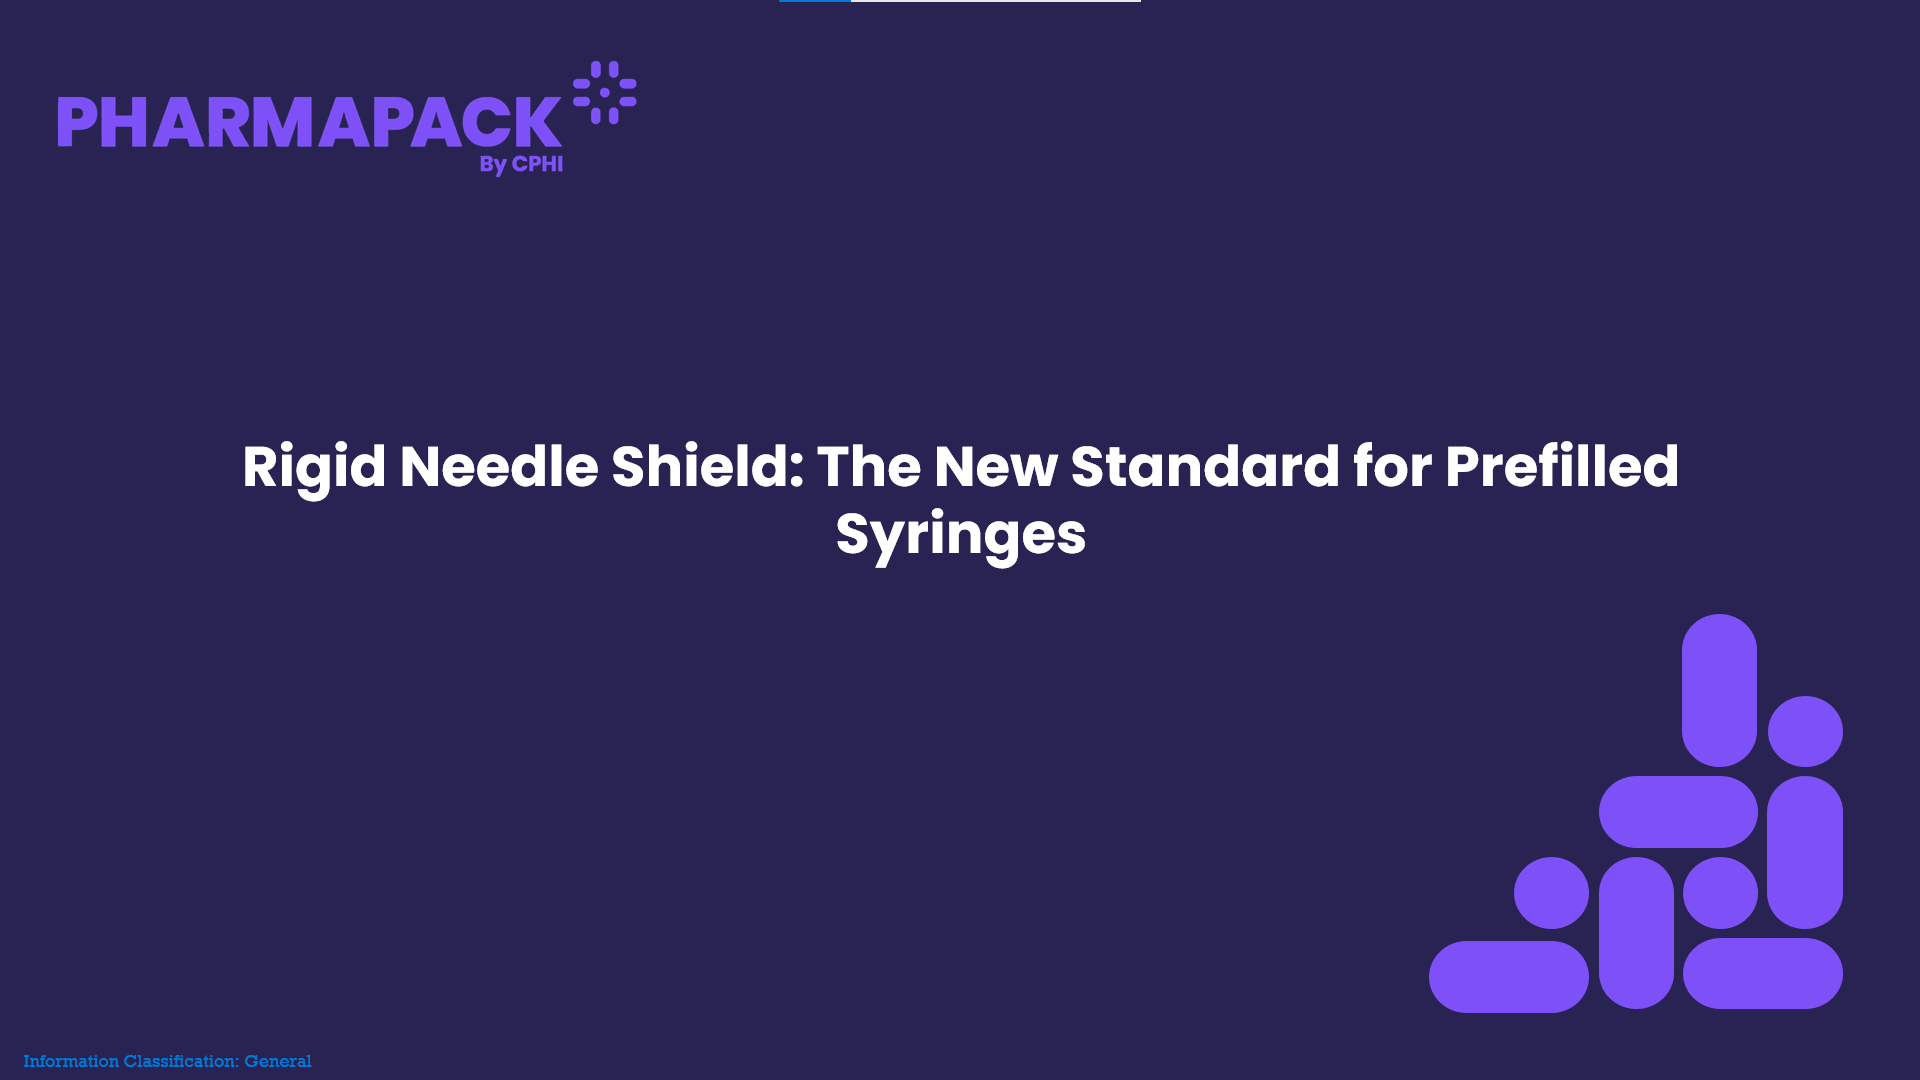 Rigid Needle Shield: The New Standard for Prefilled Syringes